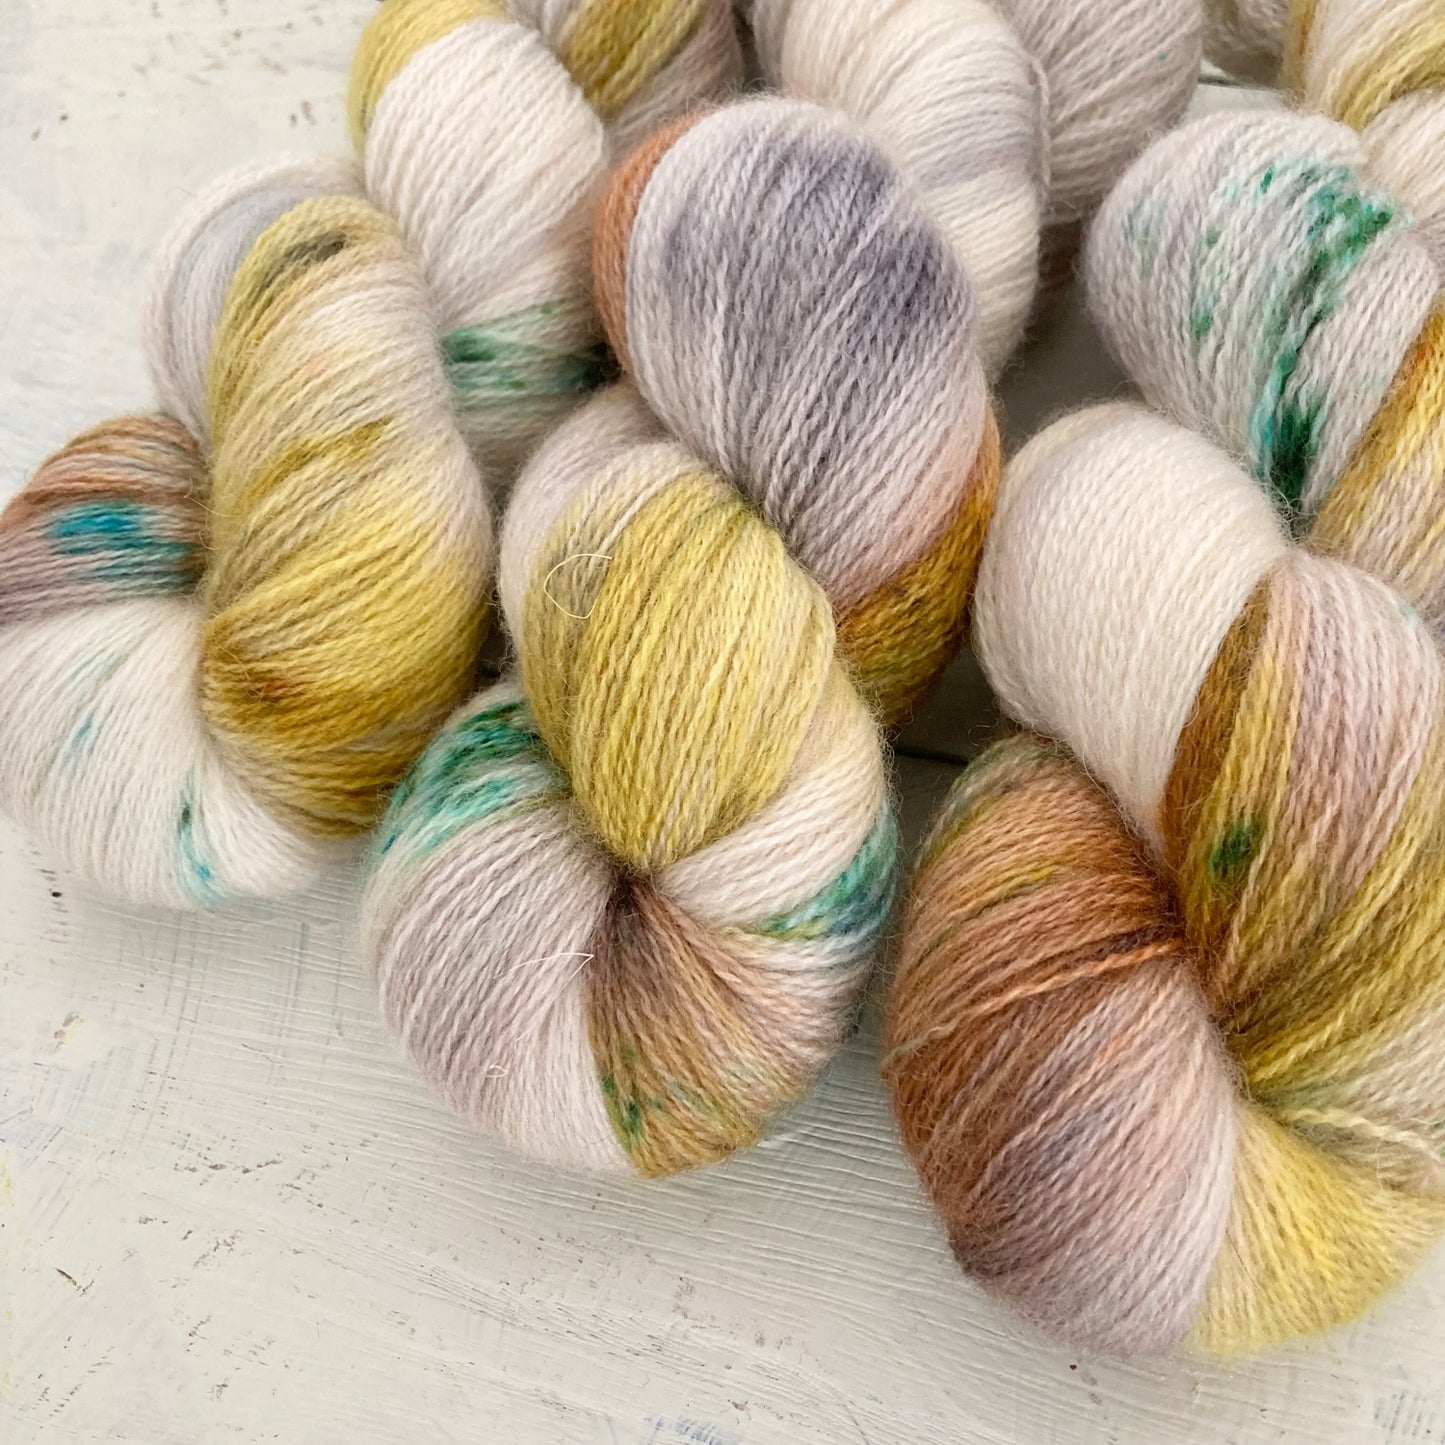 Hand-dyed yarn No.175 BFL lace "Il Cardellino"